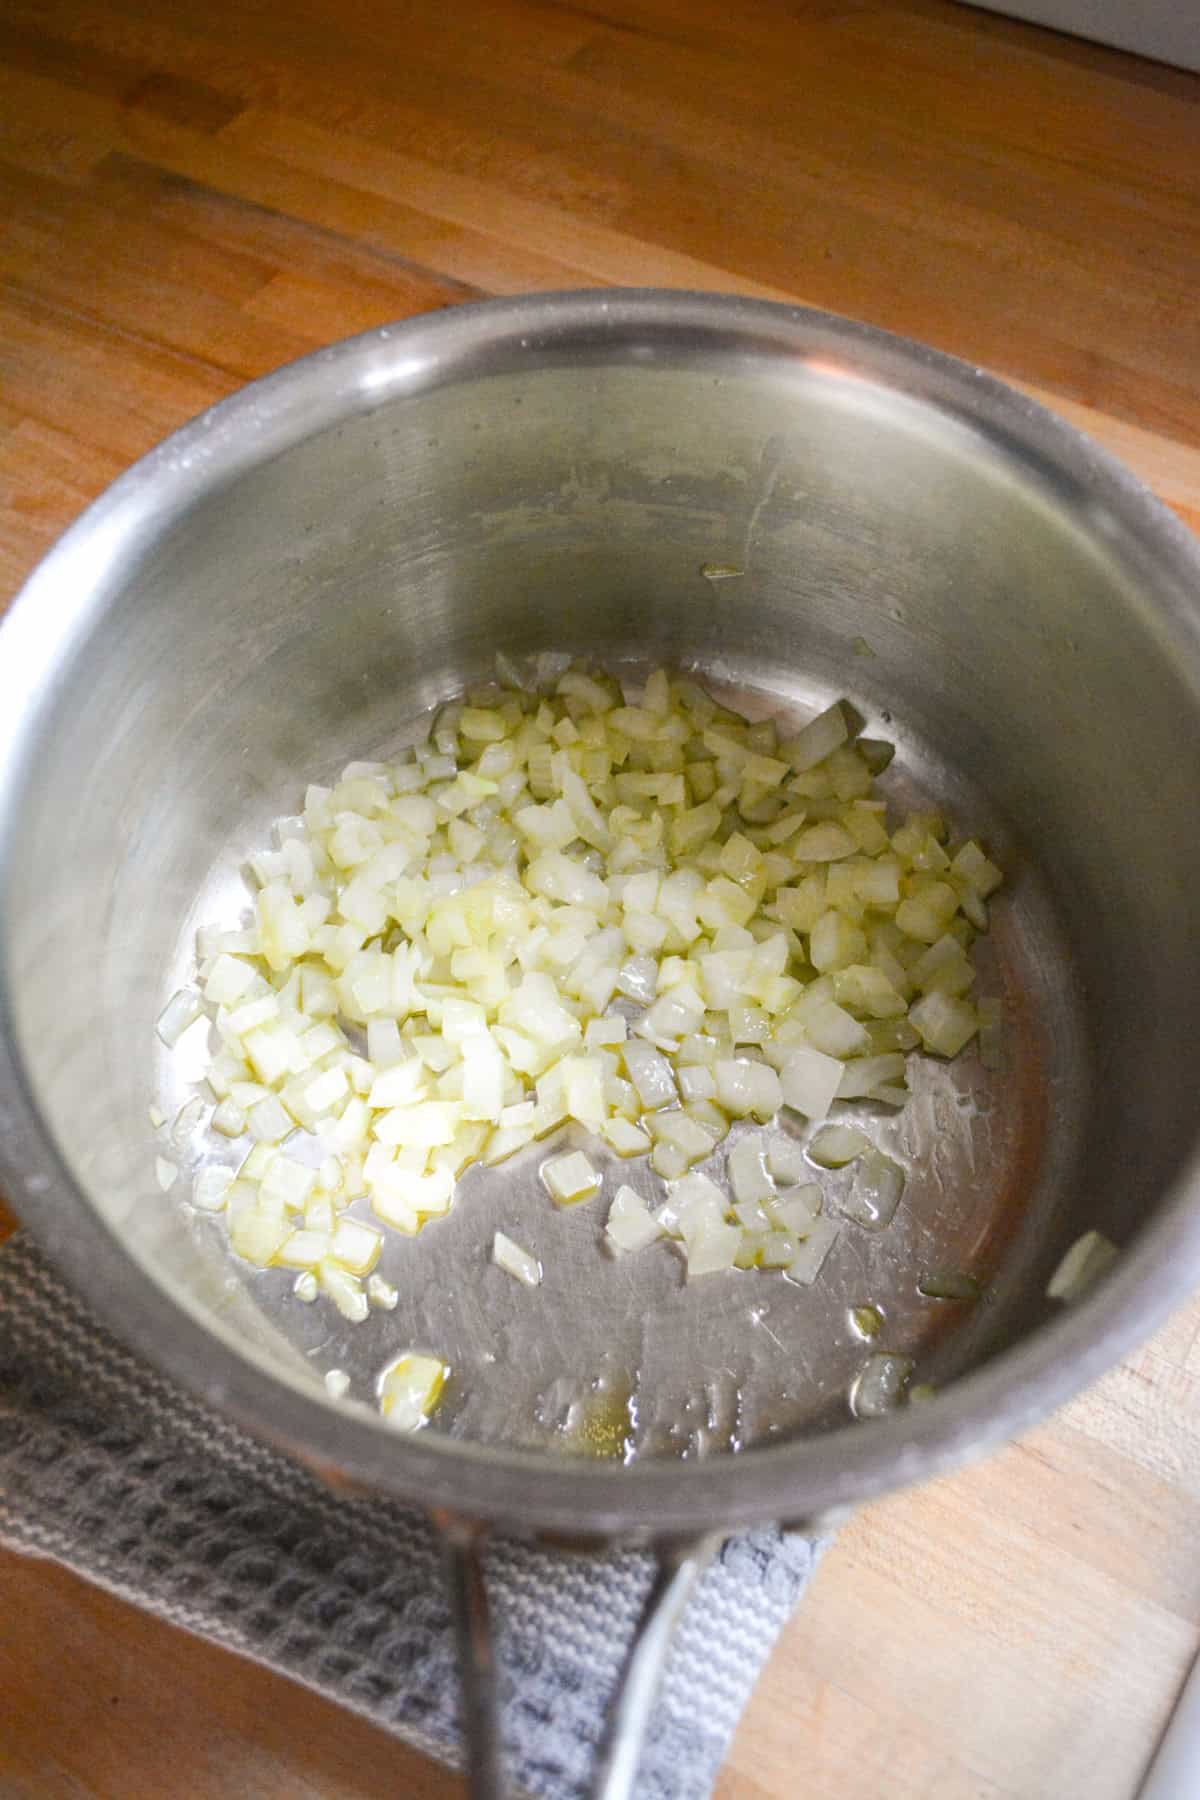 Onion sautéing in olive oil in a saucepan.